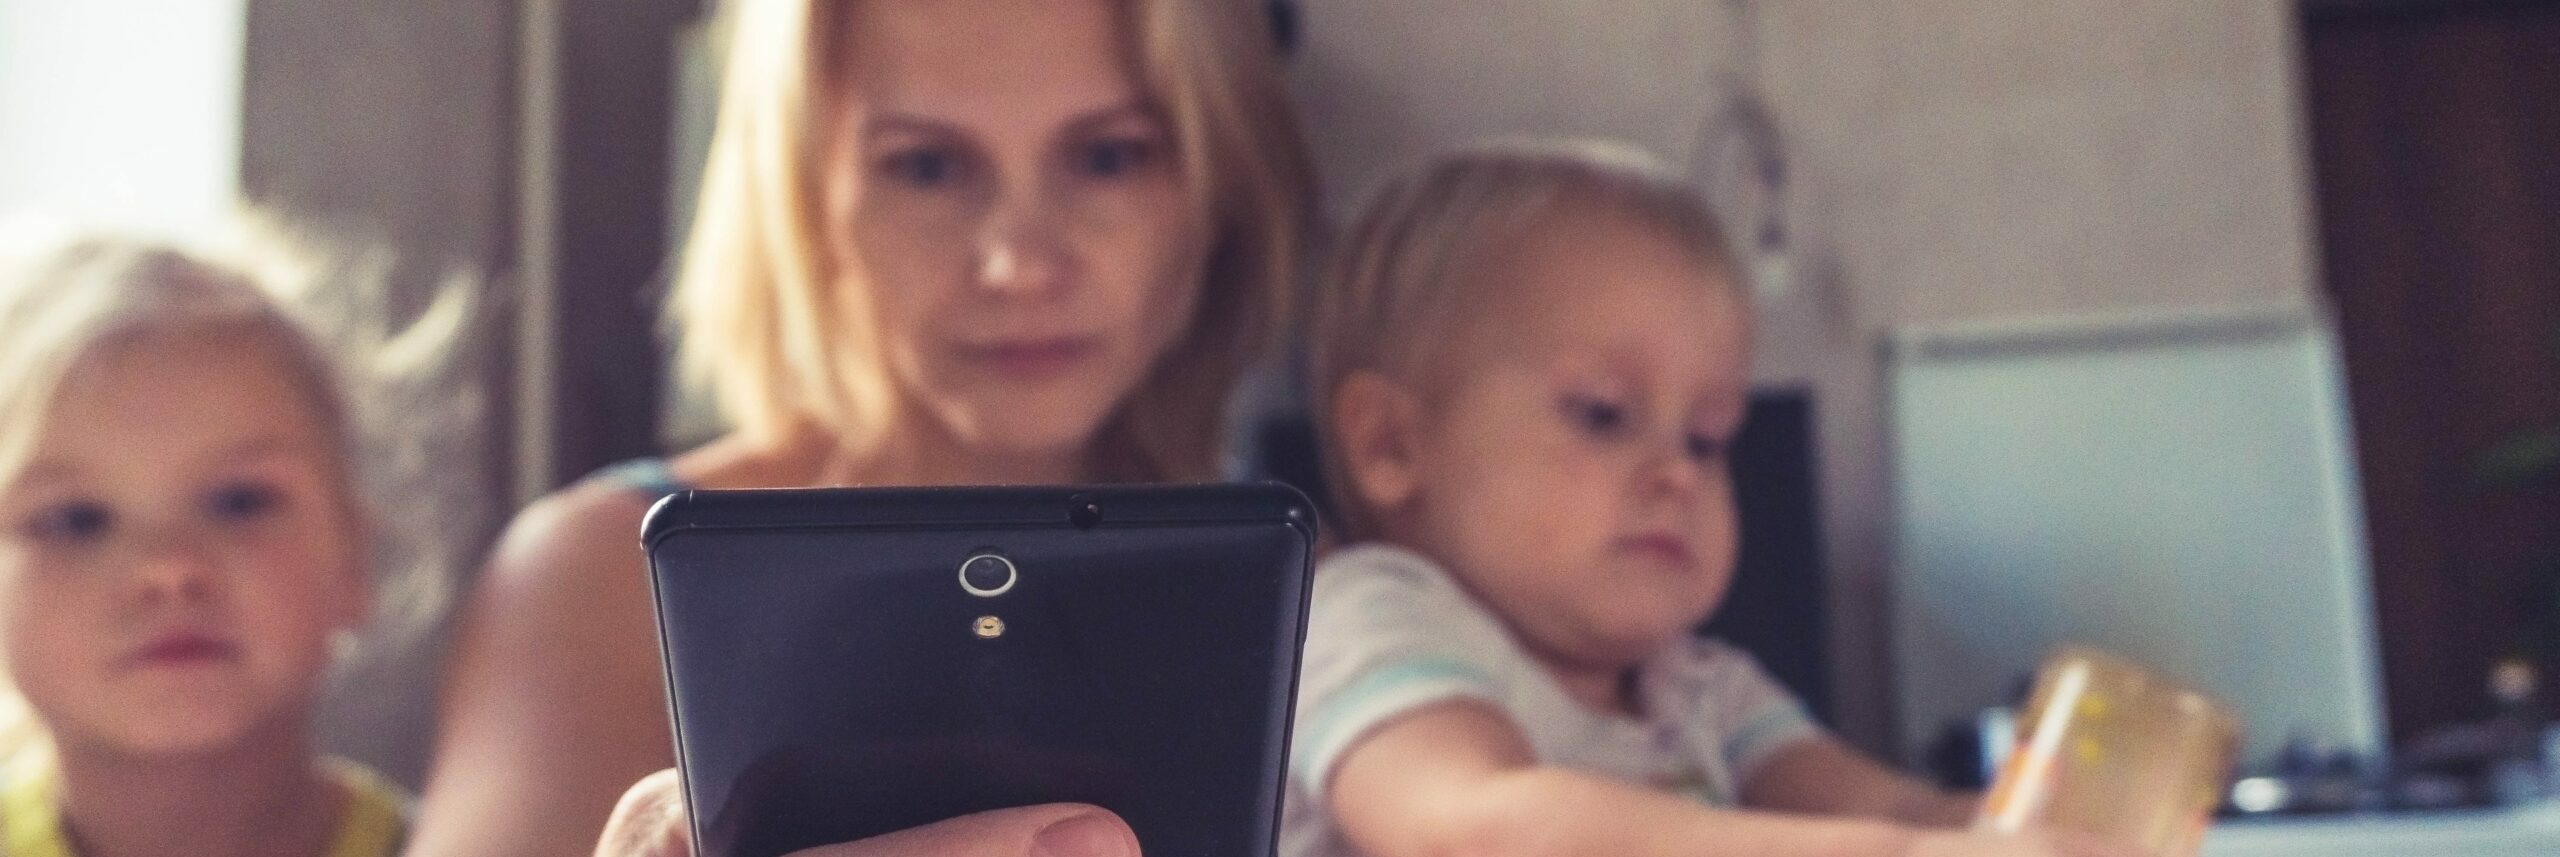 Woman with two children, holding smartphone